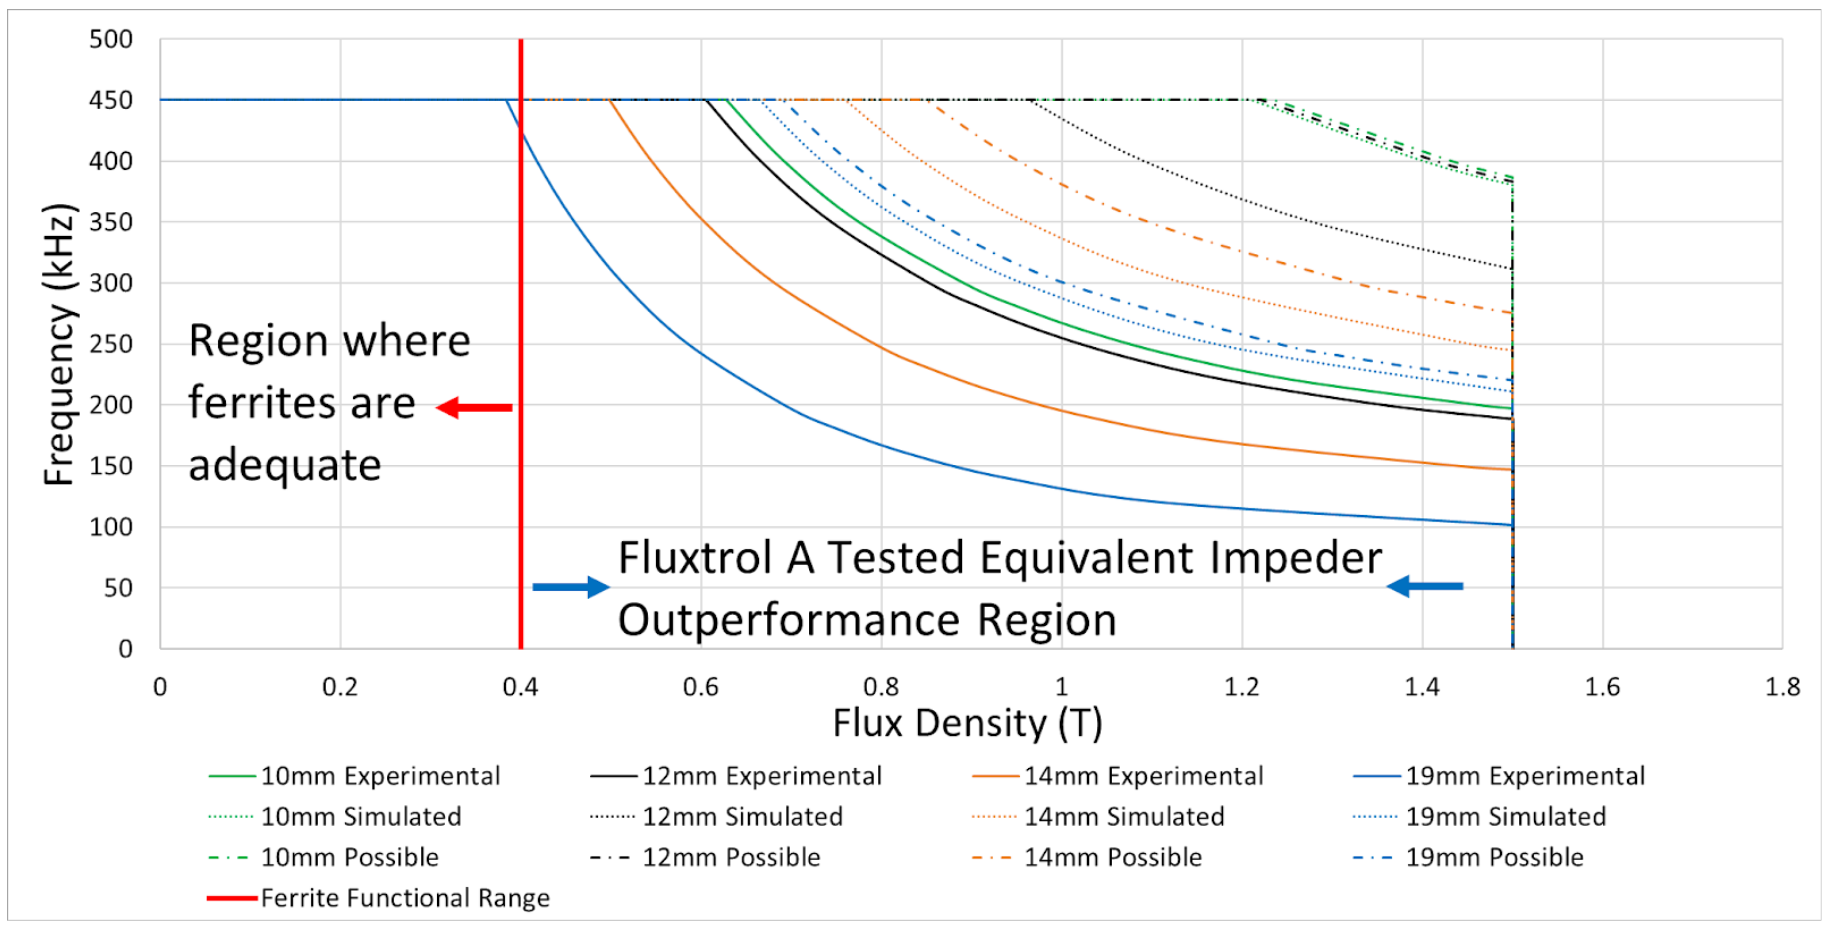 Fluxtrol | HES 23 Physical Simulation and Computational Modelling for Validation of Soft Magnetic Composite Impeder Performance - Figure 7: maximum testing ranges of Fluxtrol A impeders